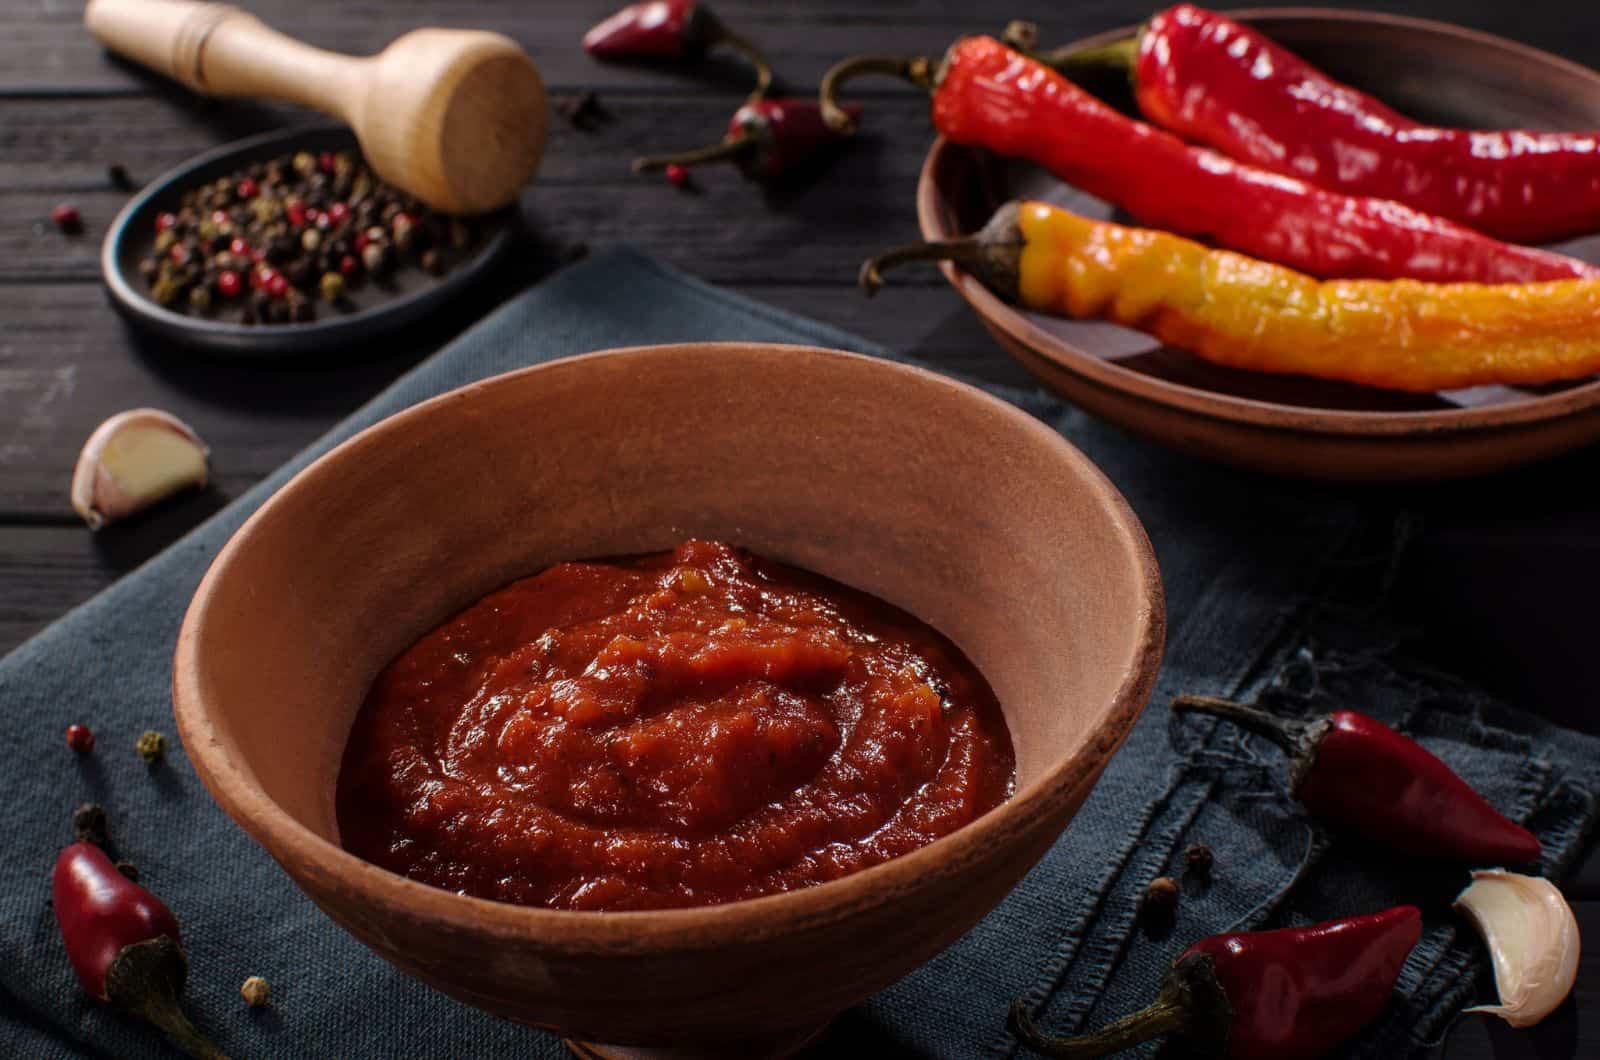 Harissa - a middle eastern hot red chili pepper paste